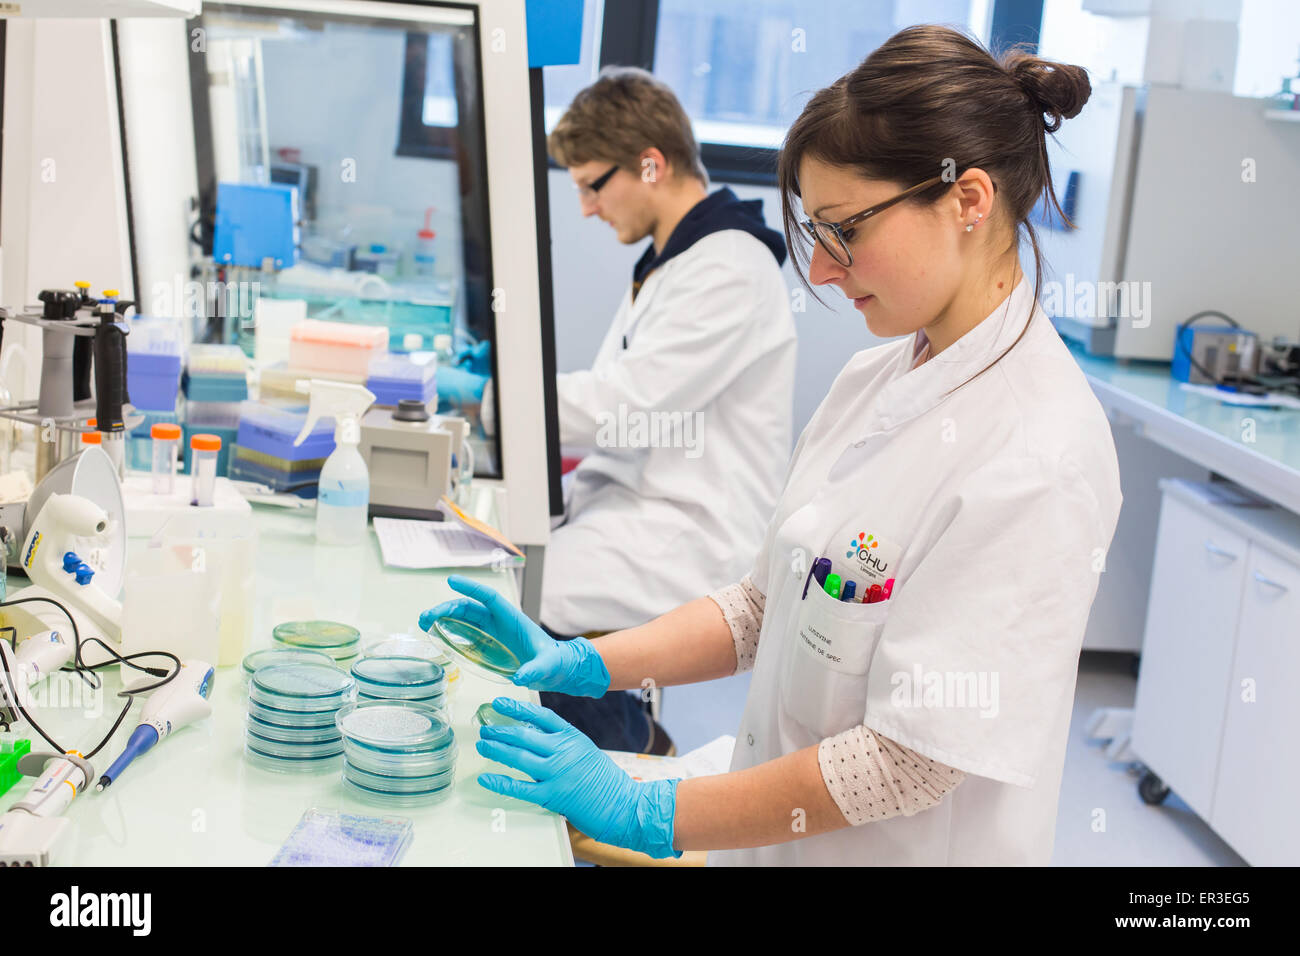 Hands holding a culture plate testing for the presence of Escherichia coli bacteria by looking at antibiotic resistance, Biology and Research Center in University Hospital Health, Limoges, France. Stock Photo